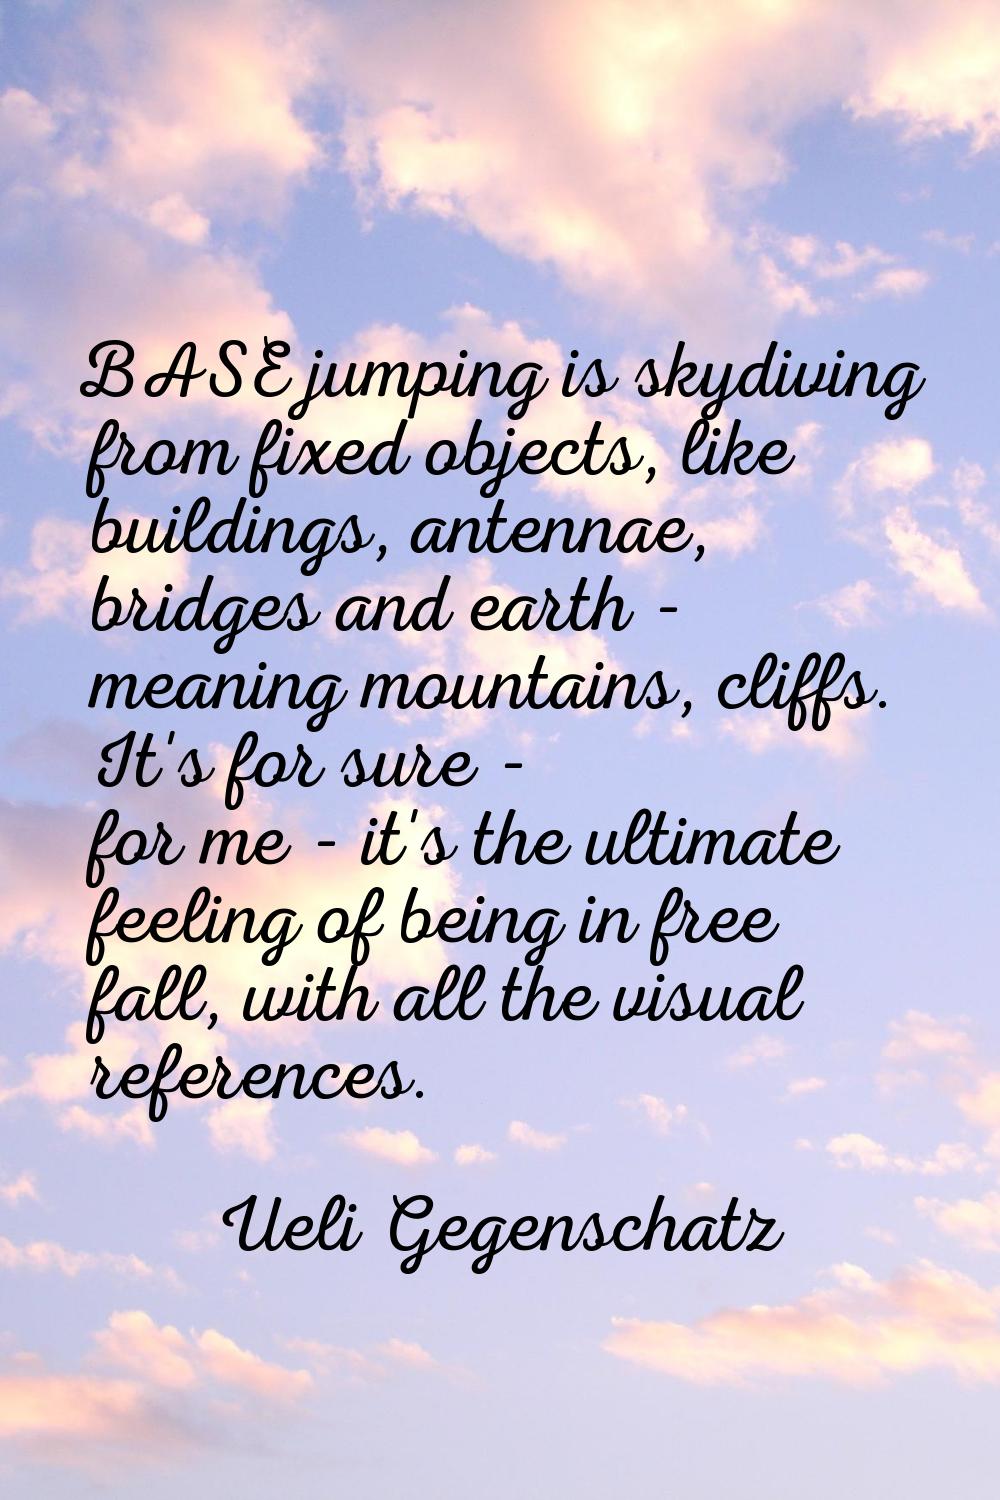 BASE jumping is skydiving from fixed objects, like buildings, antennae, bridges and earth - meaning